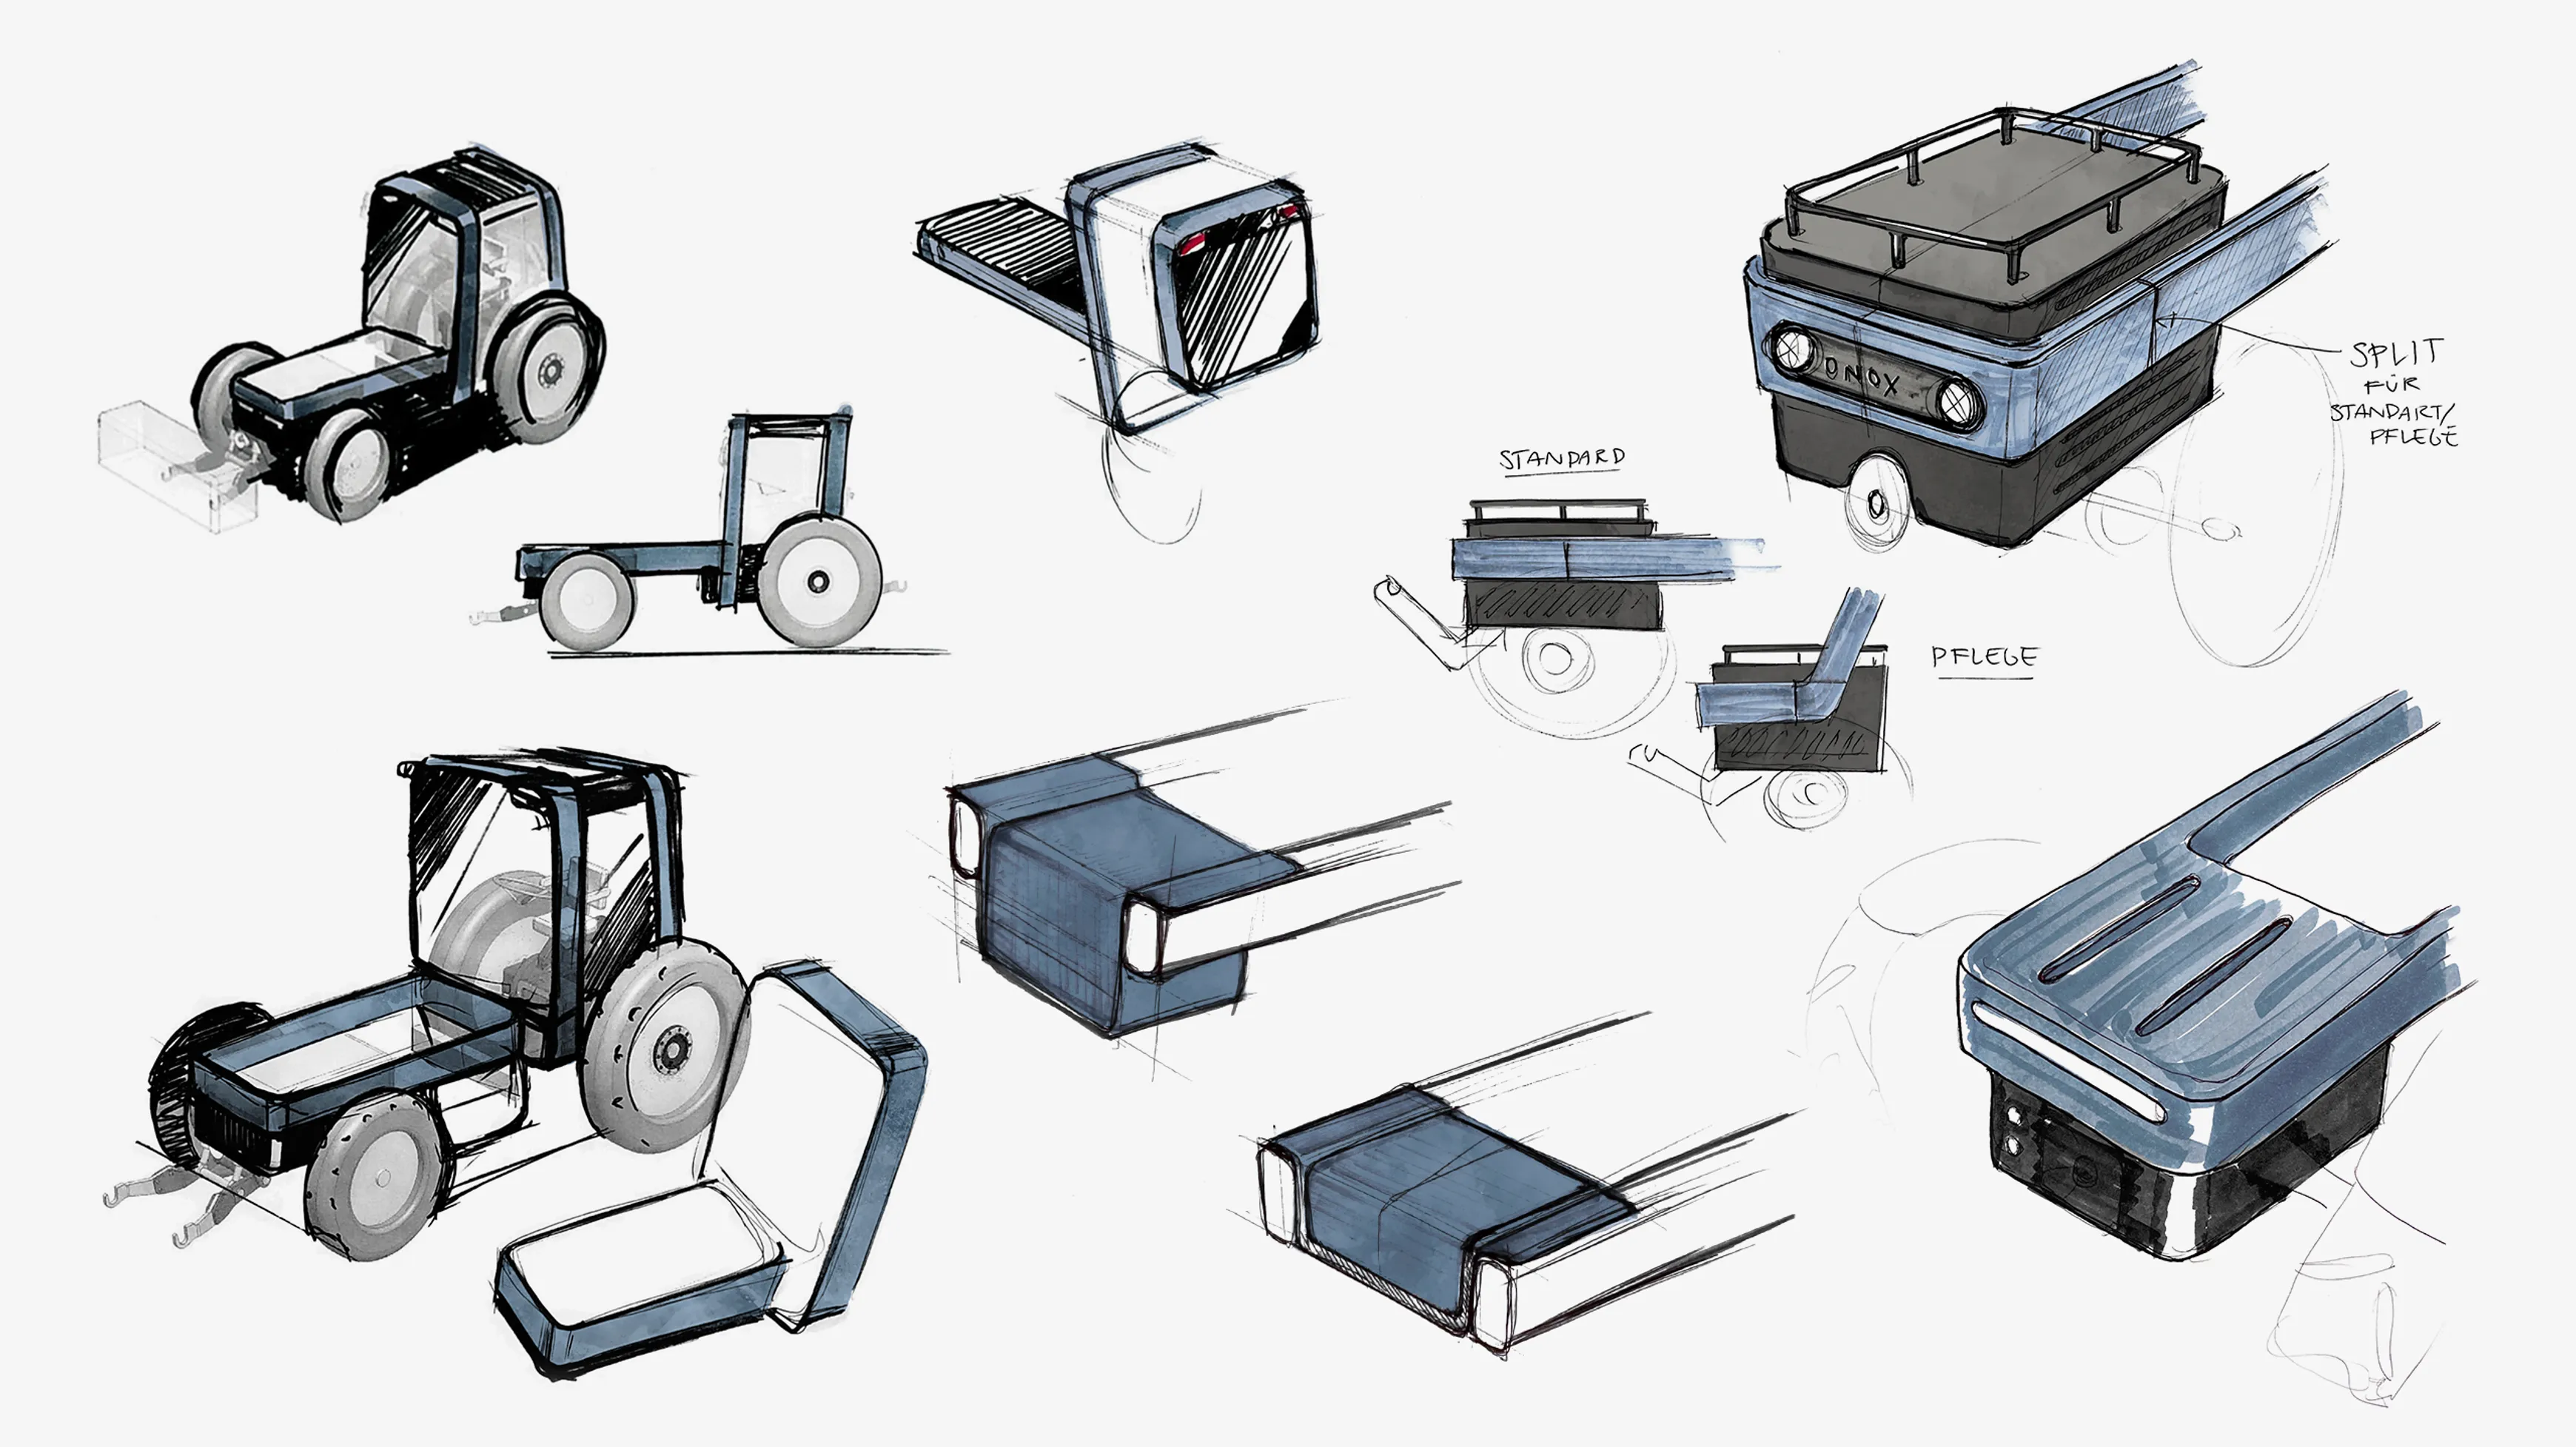 Onox tractor sketches from different angles and details